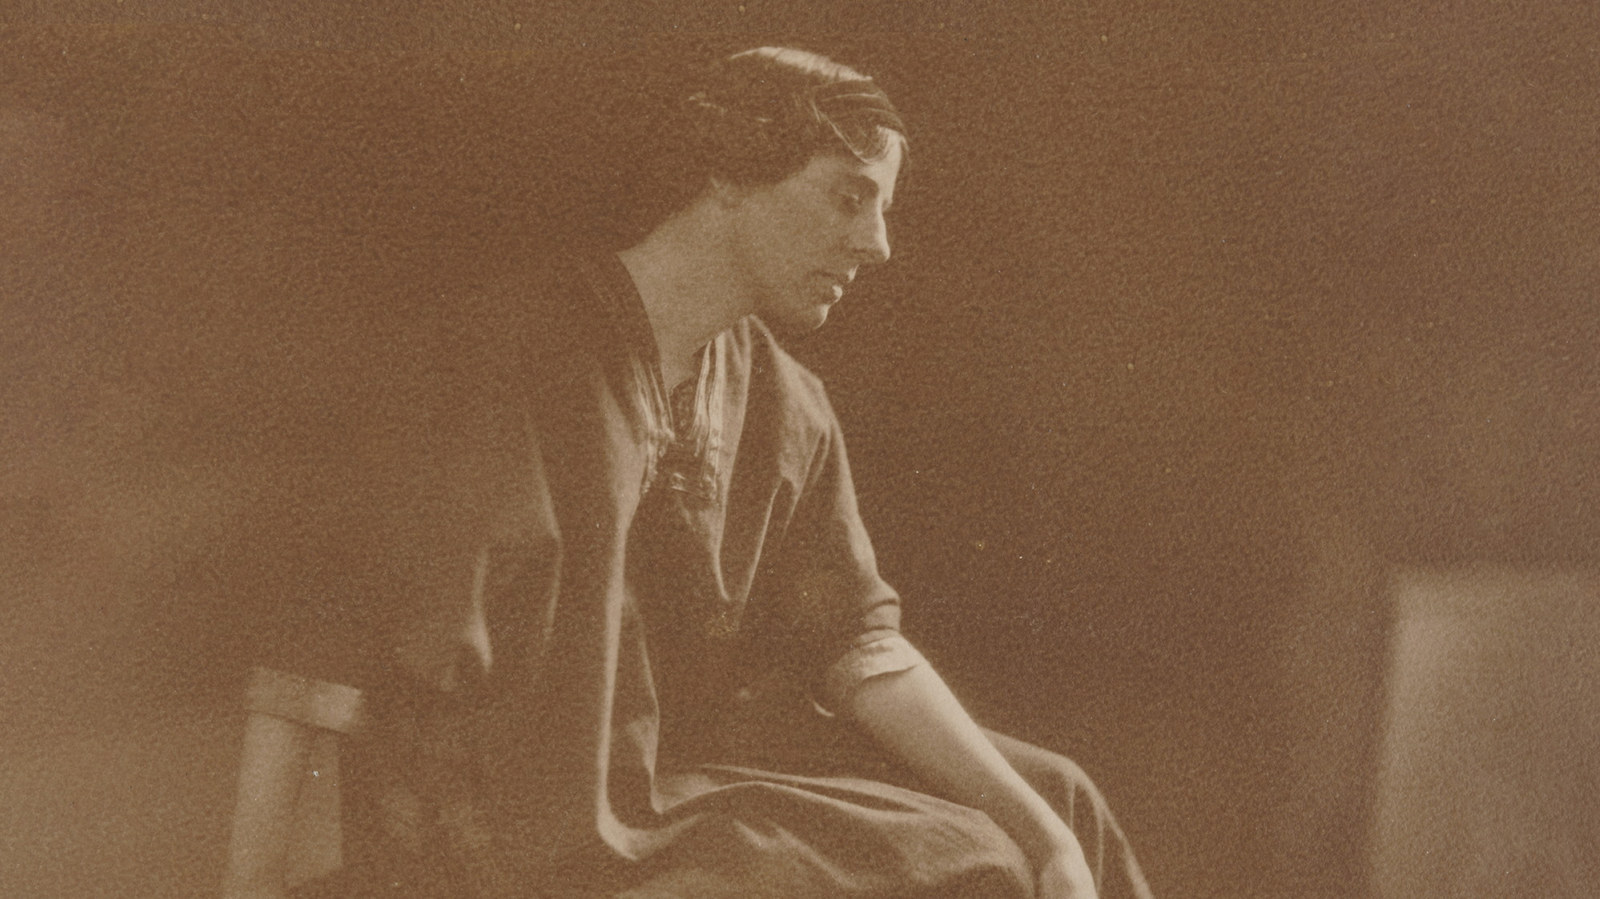 Sepia toned photo of seated woman in profile.